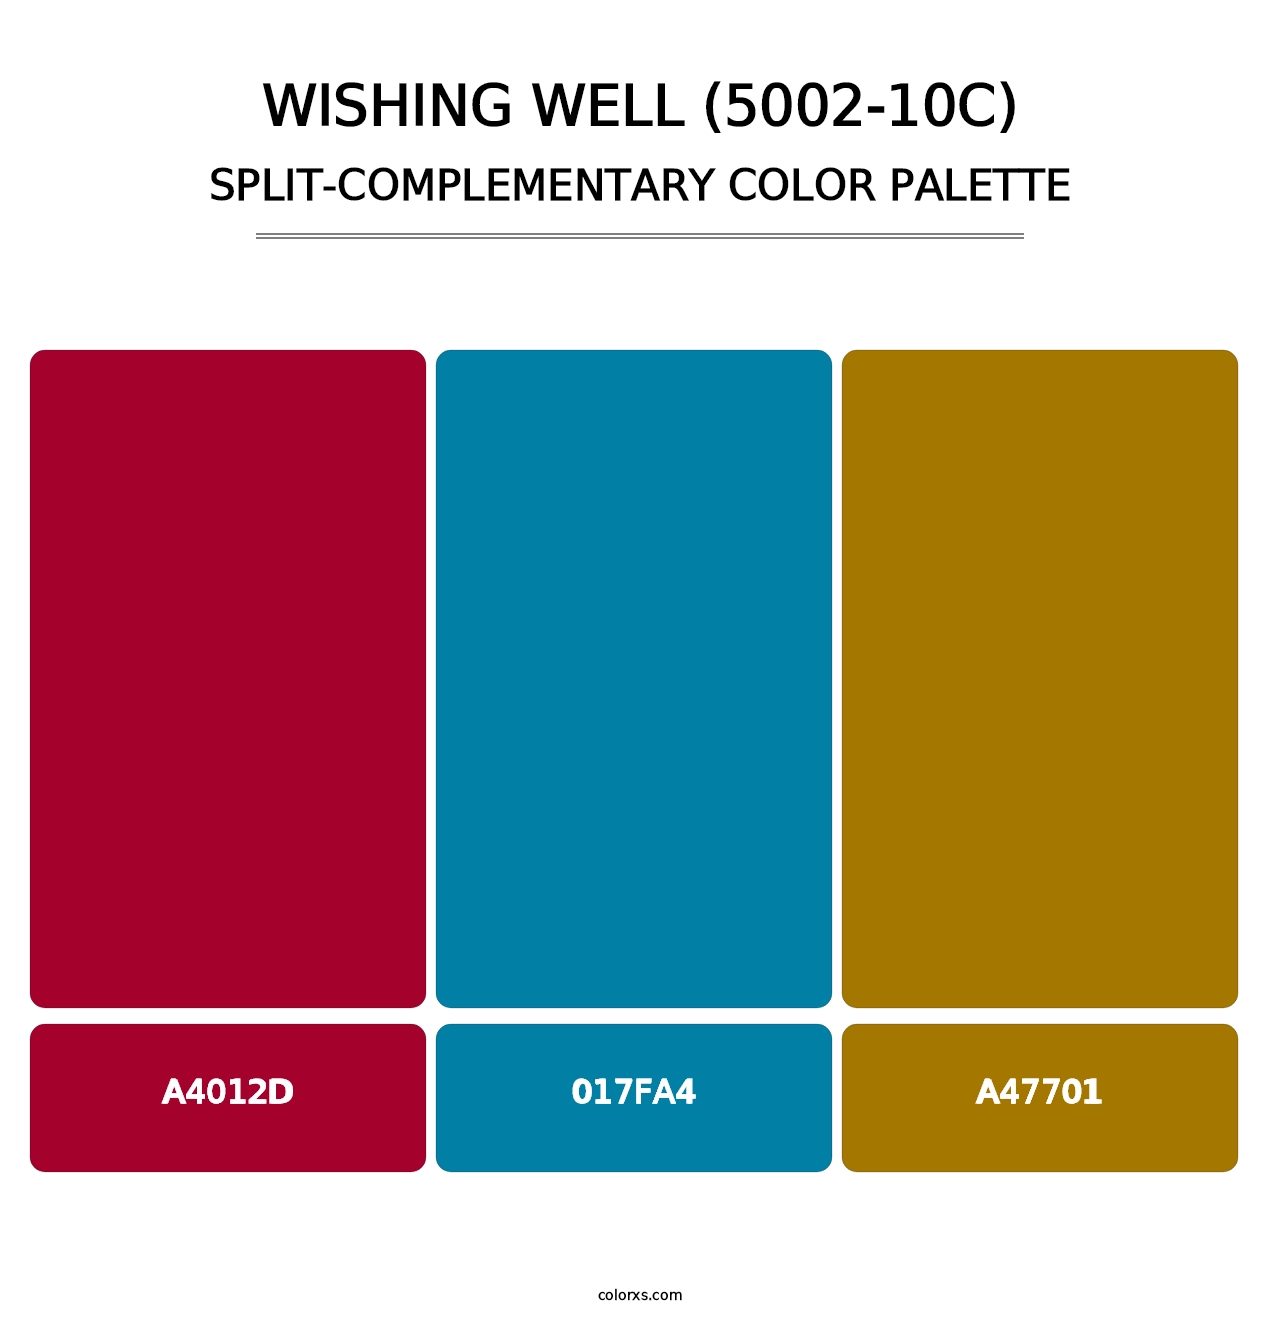 Wishing Well (5002-10C) - Split-Complementary Color Palette